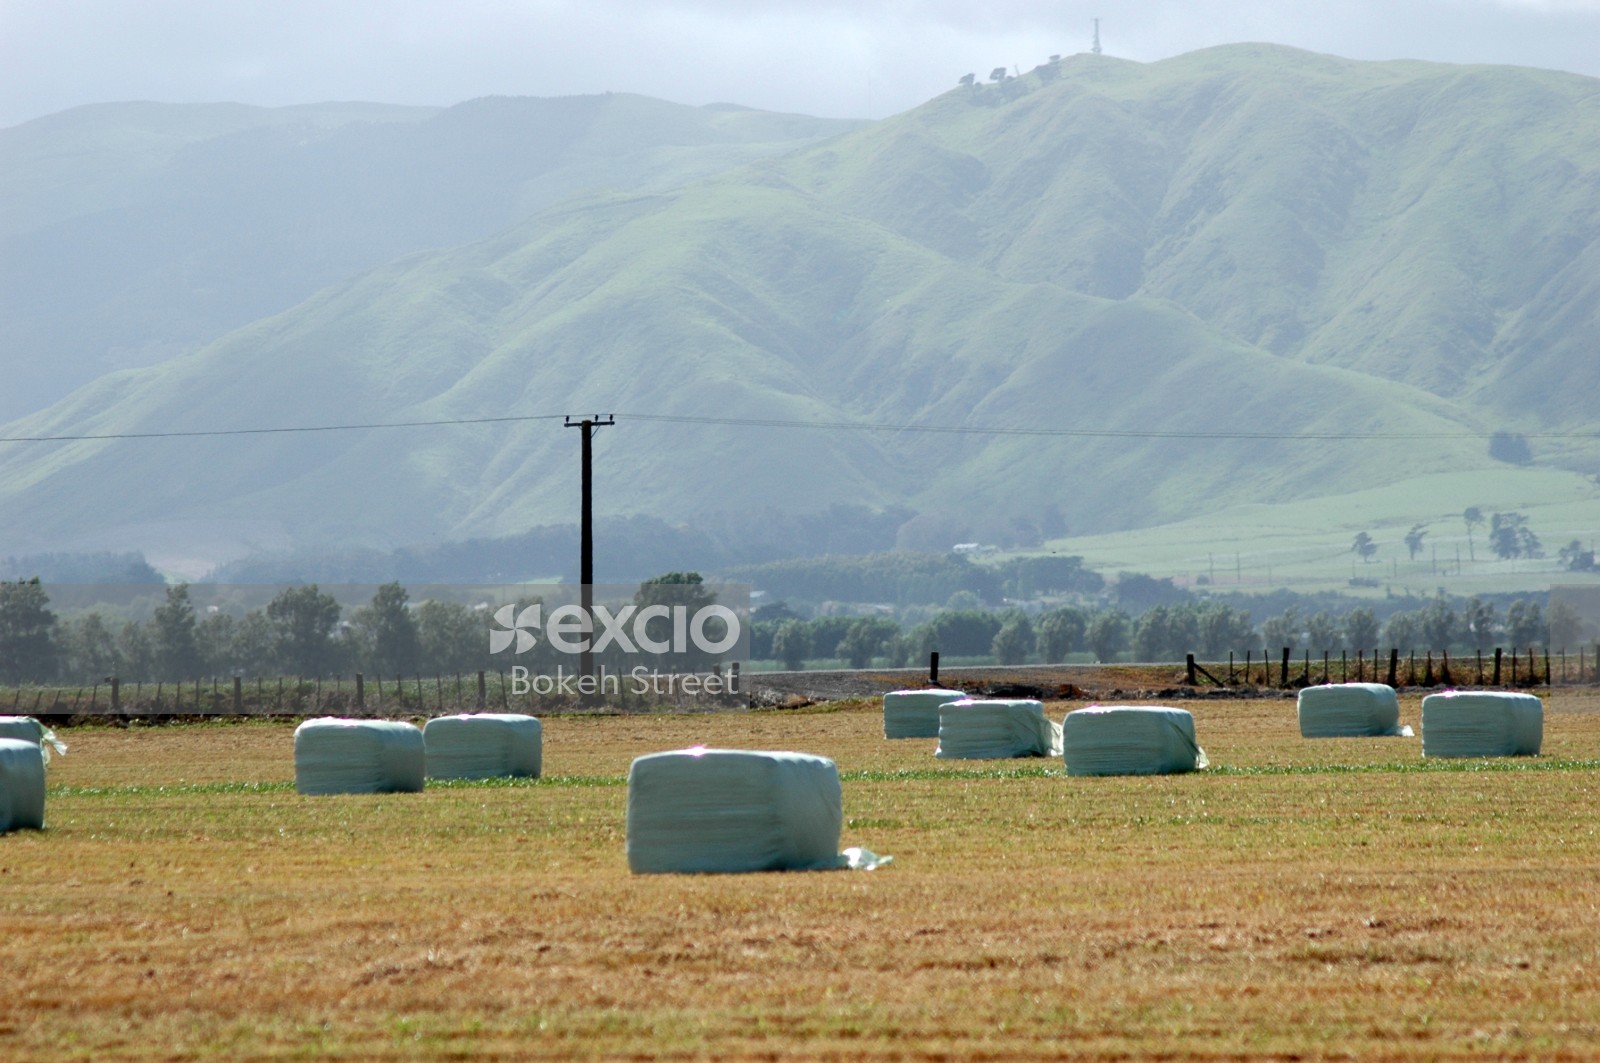 Packed hay bales at a field in New Zealand